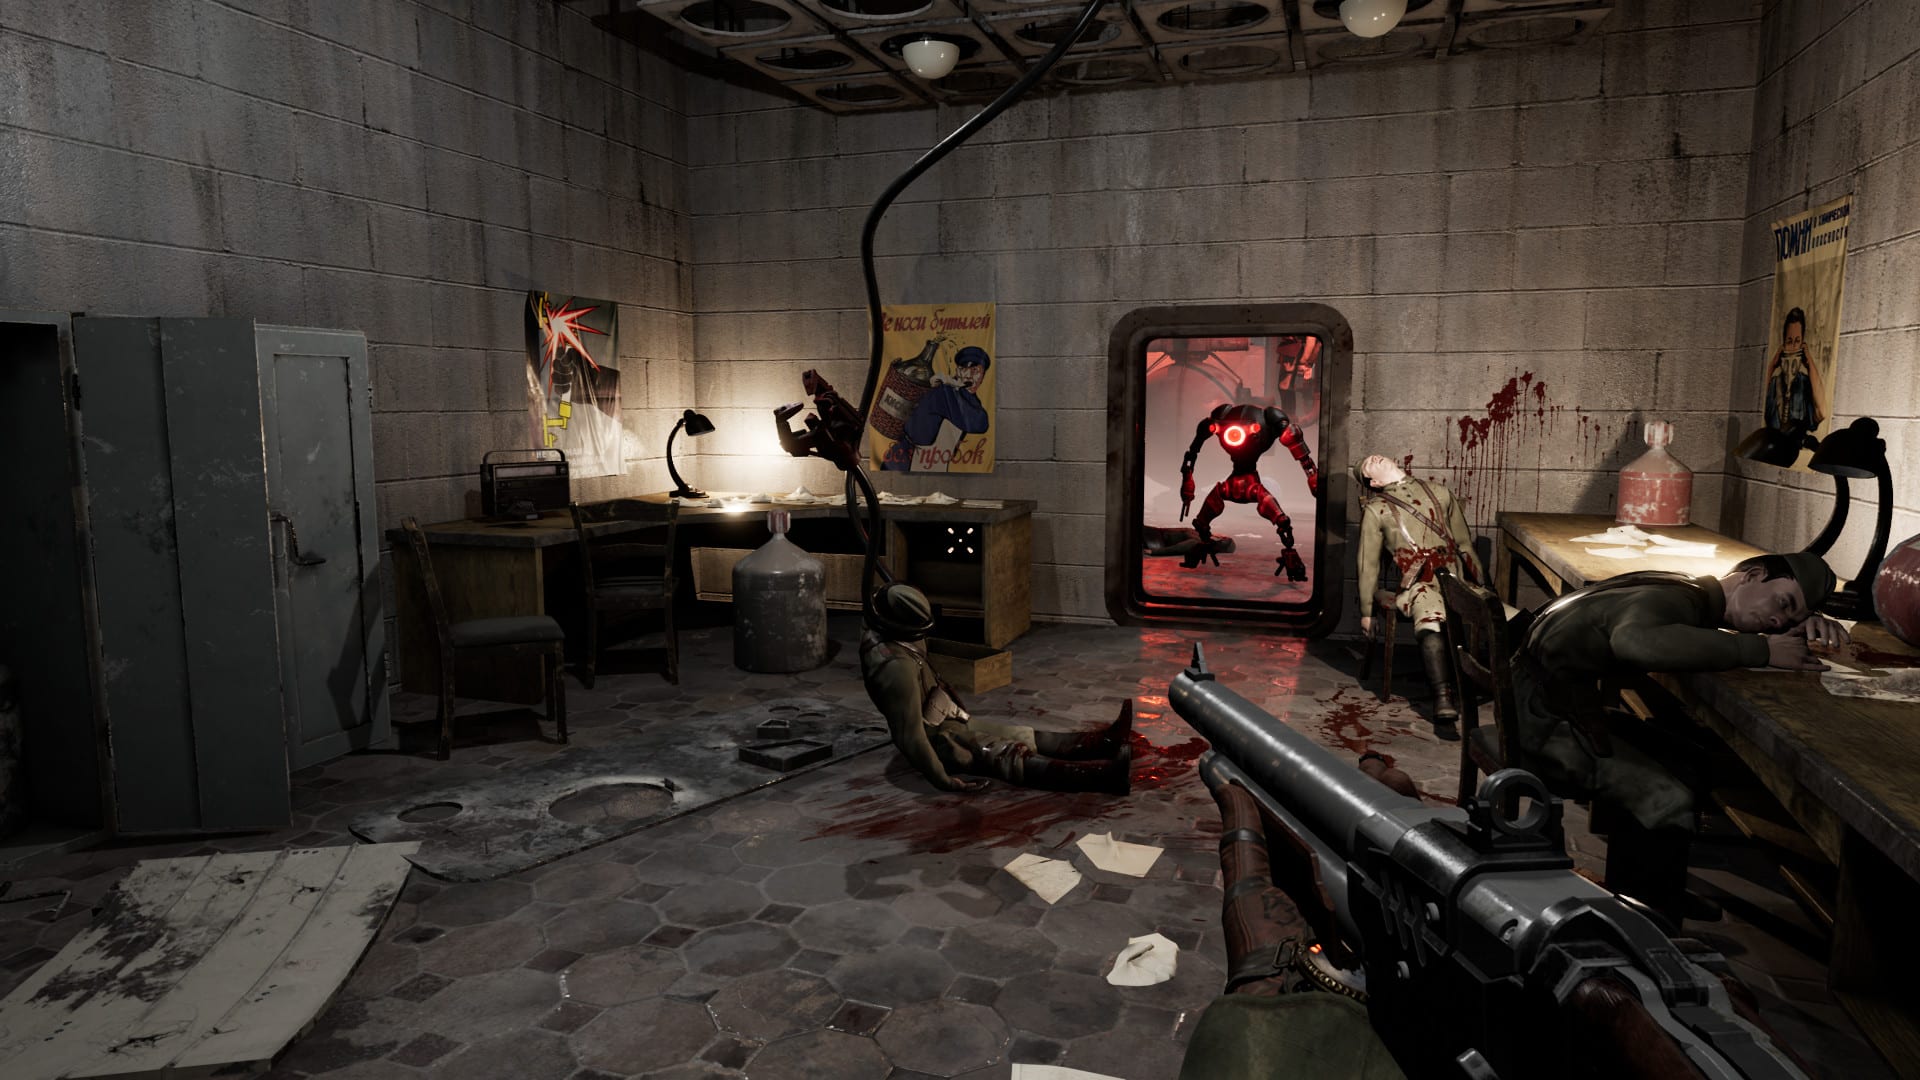 First Atomic Heart scores, new gameplay and console comparisons revealed